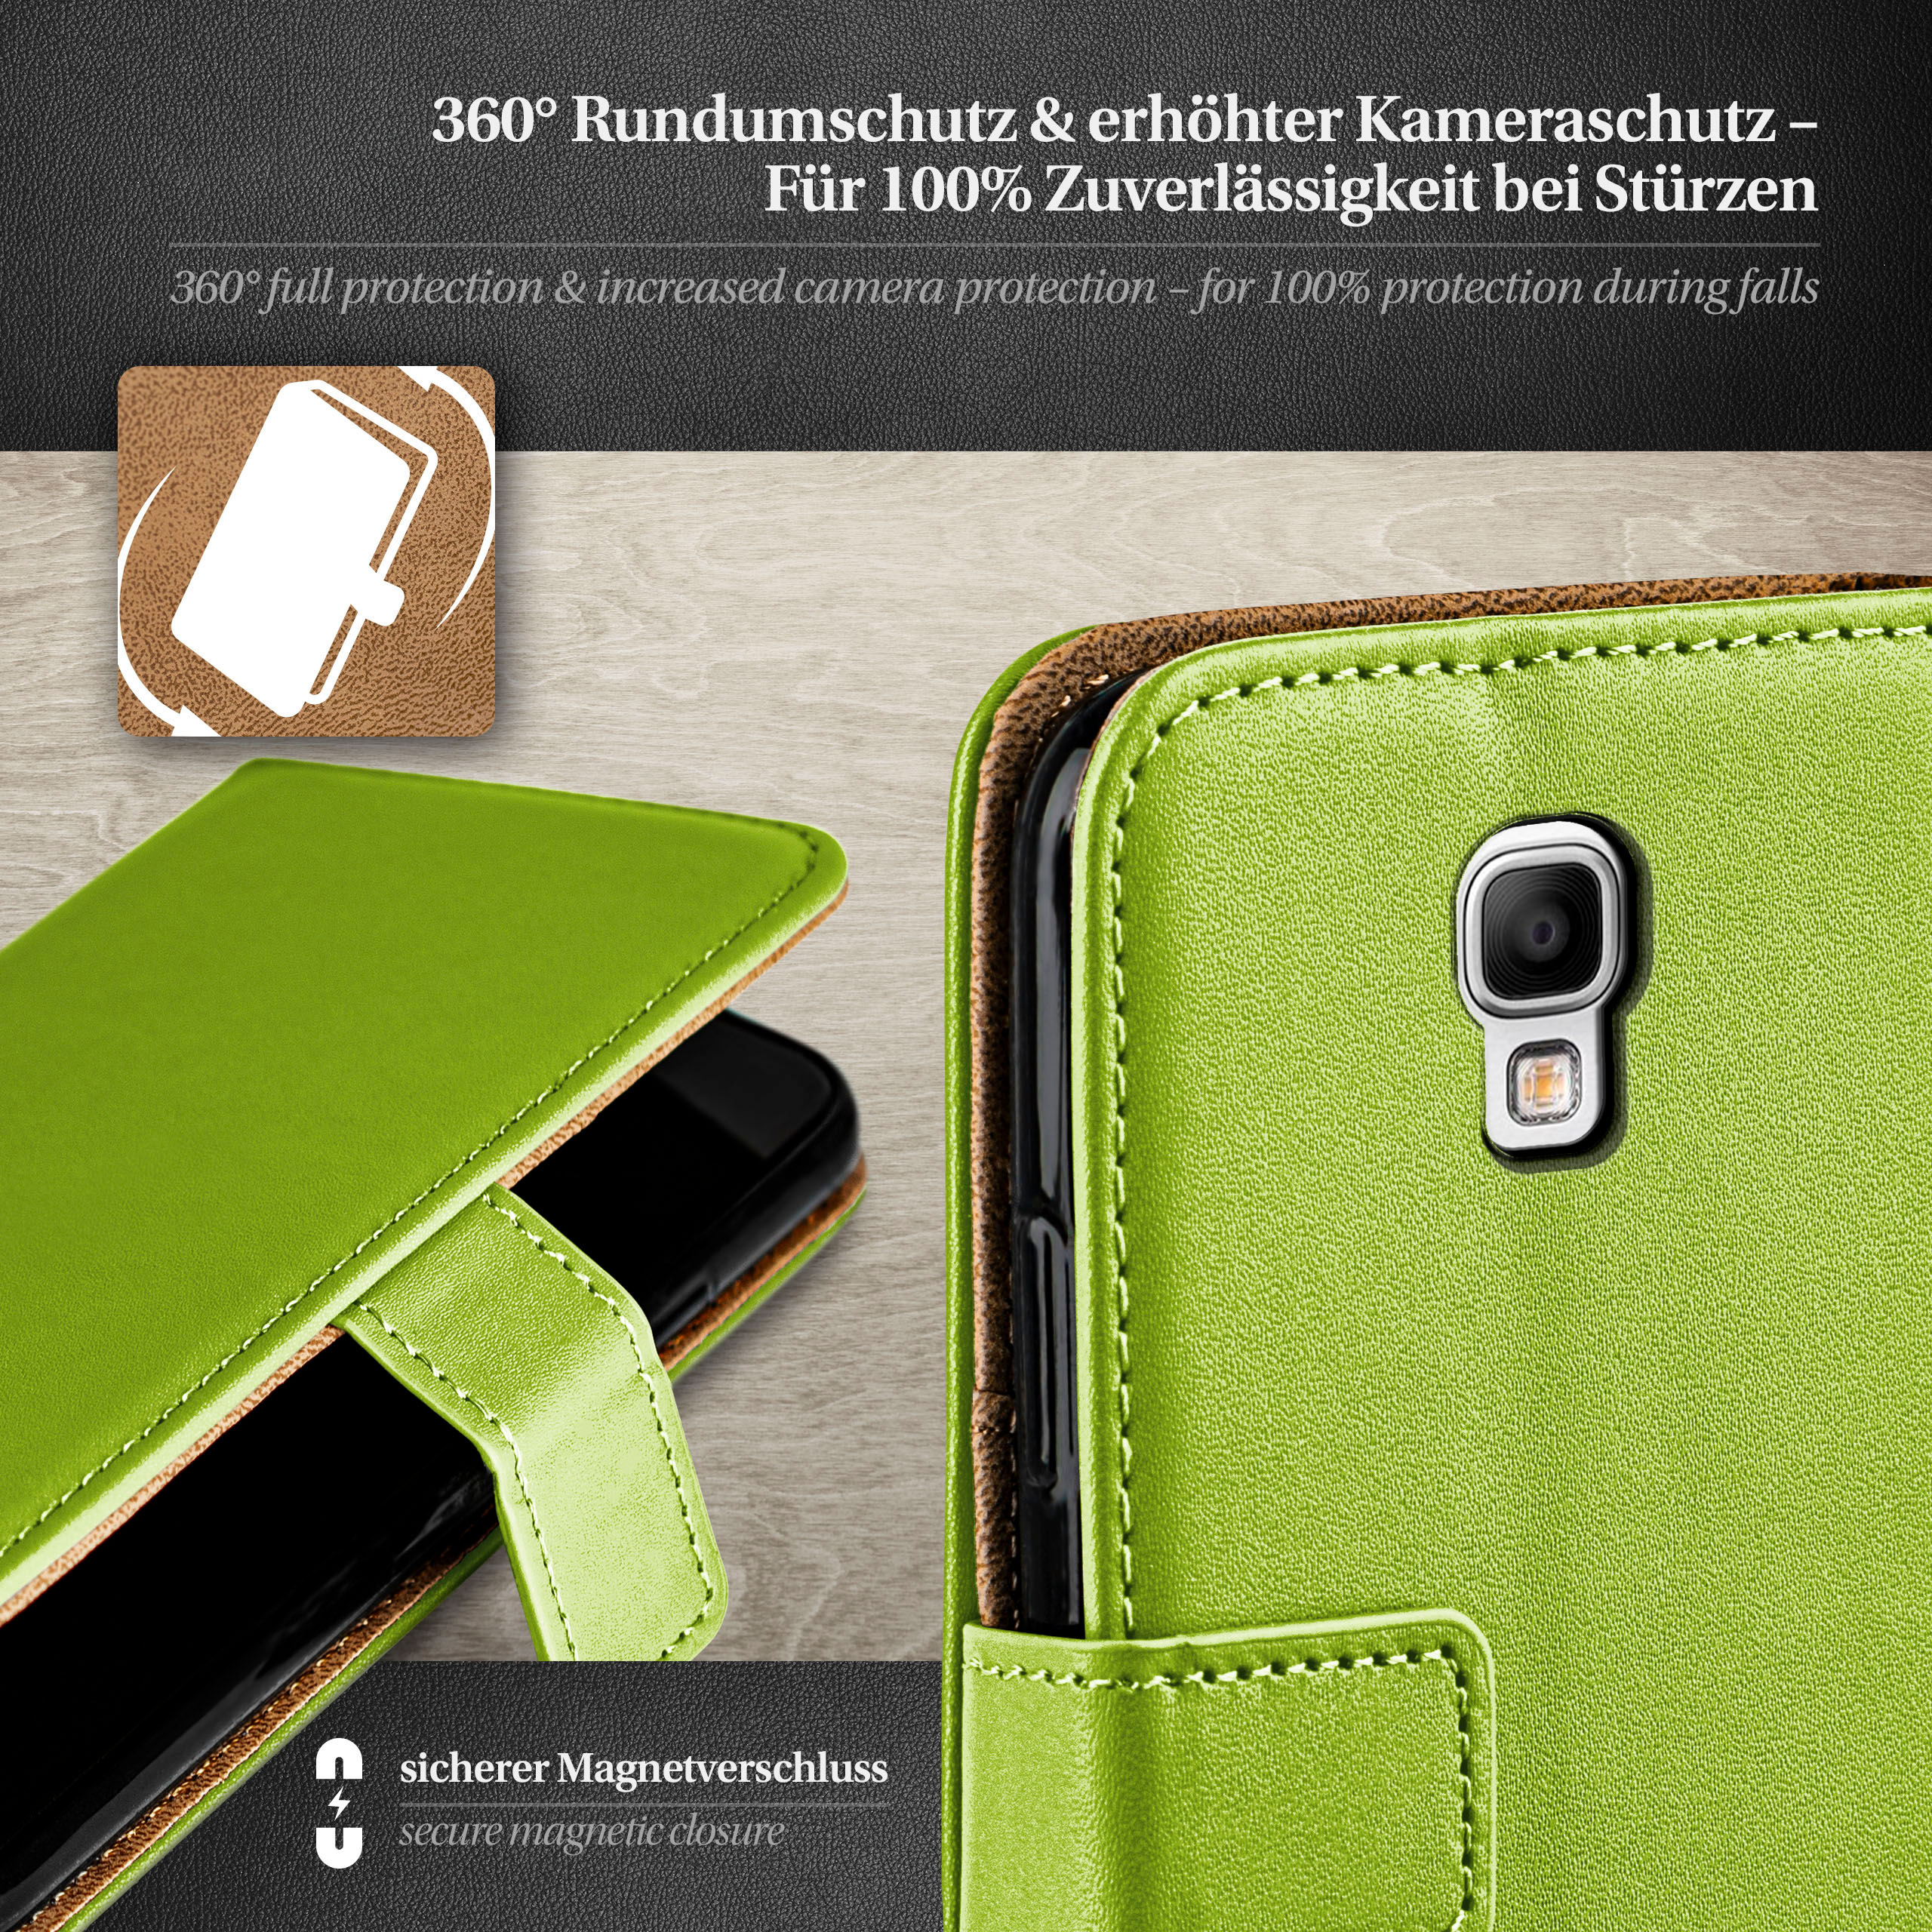 MOEX Book Case, Bookcover, 3 Note Neo, Samsung, Lime-Green Galaxy